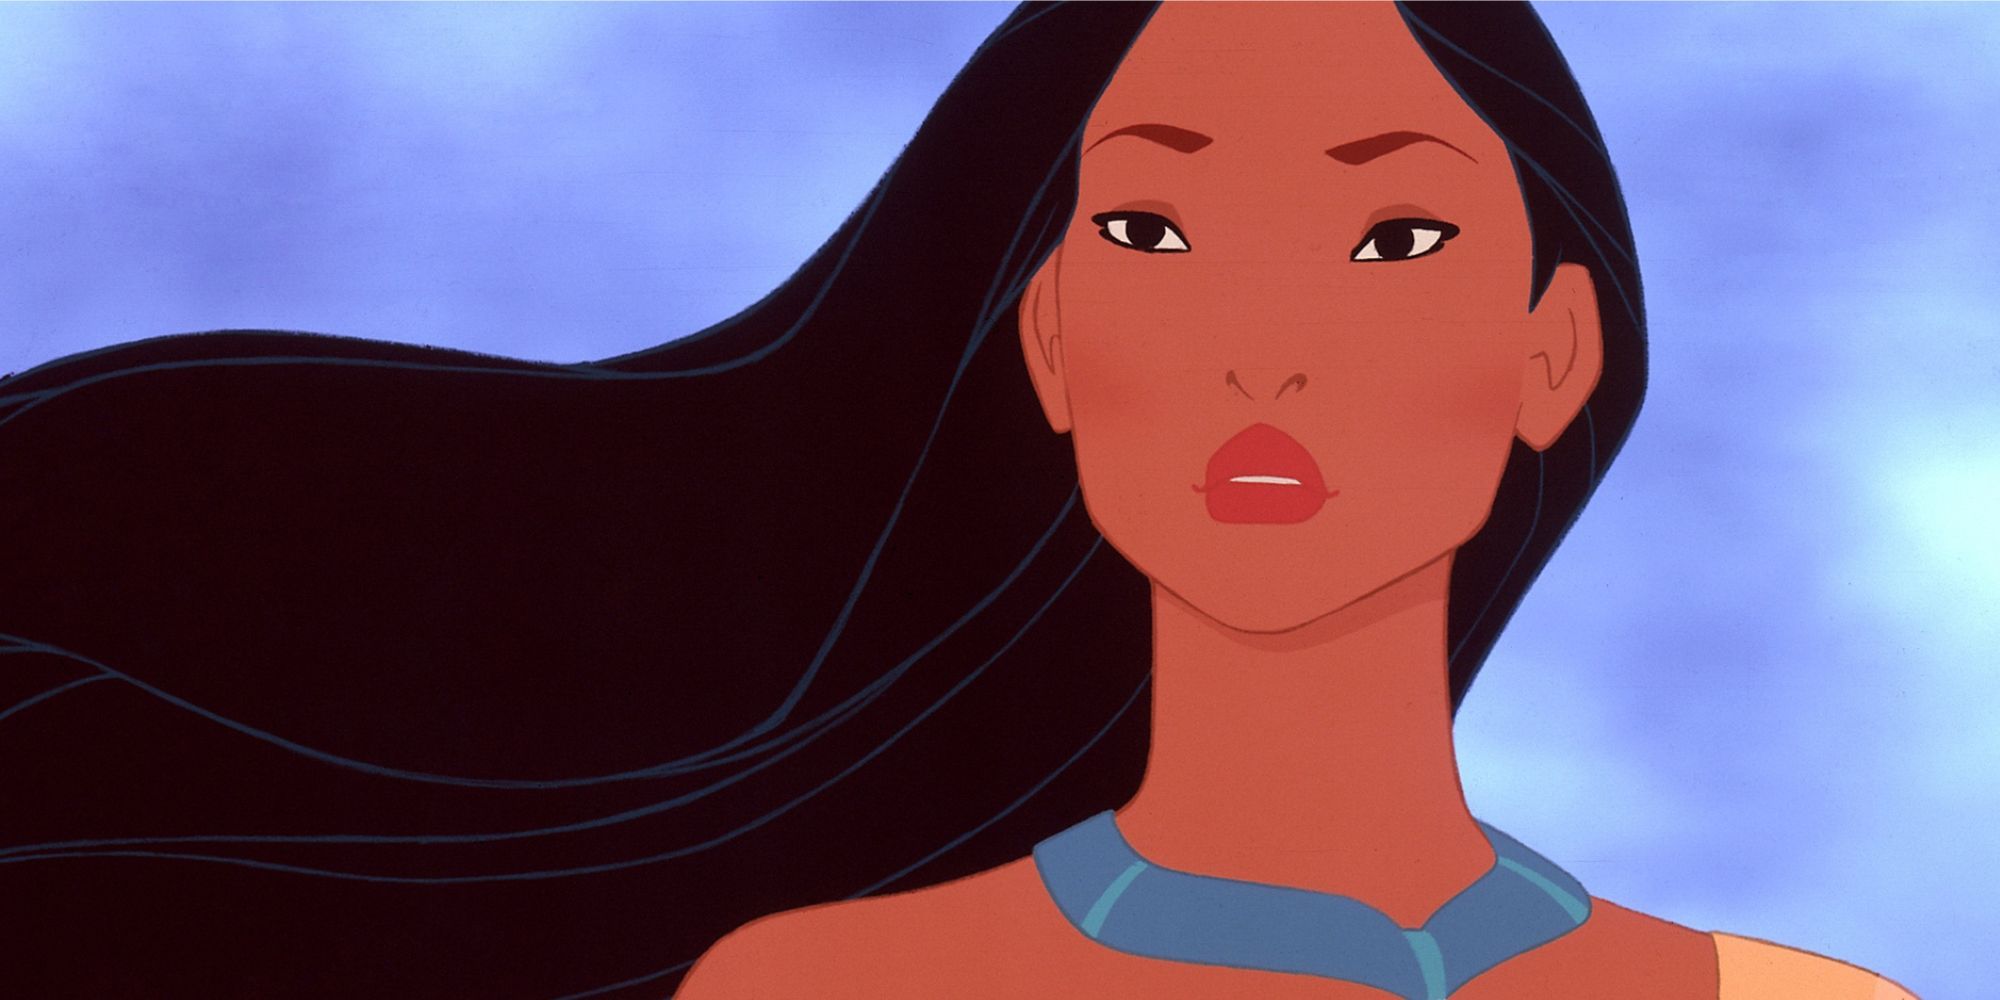 The wind blows across her face in Pocahontas.